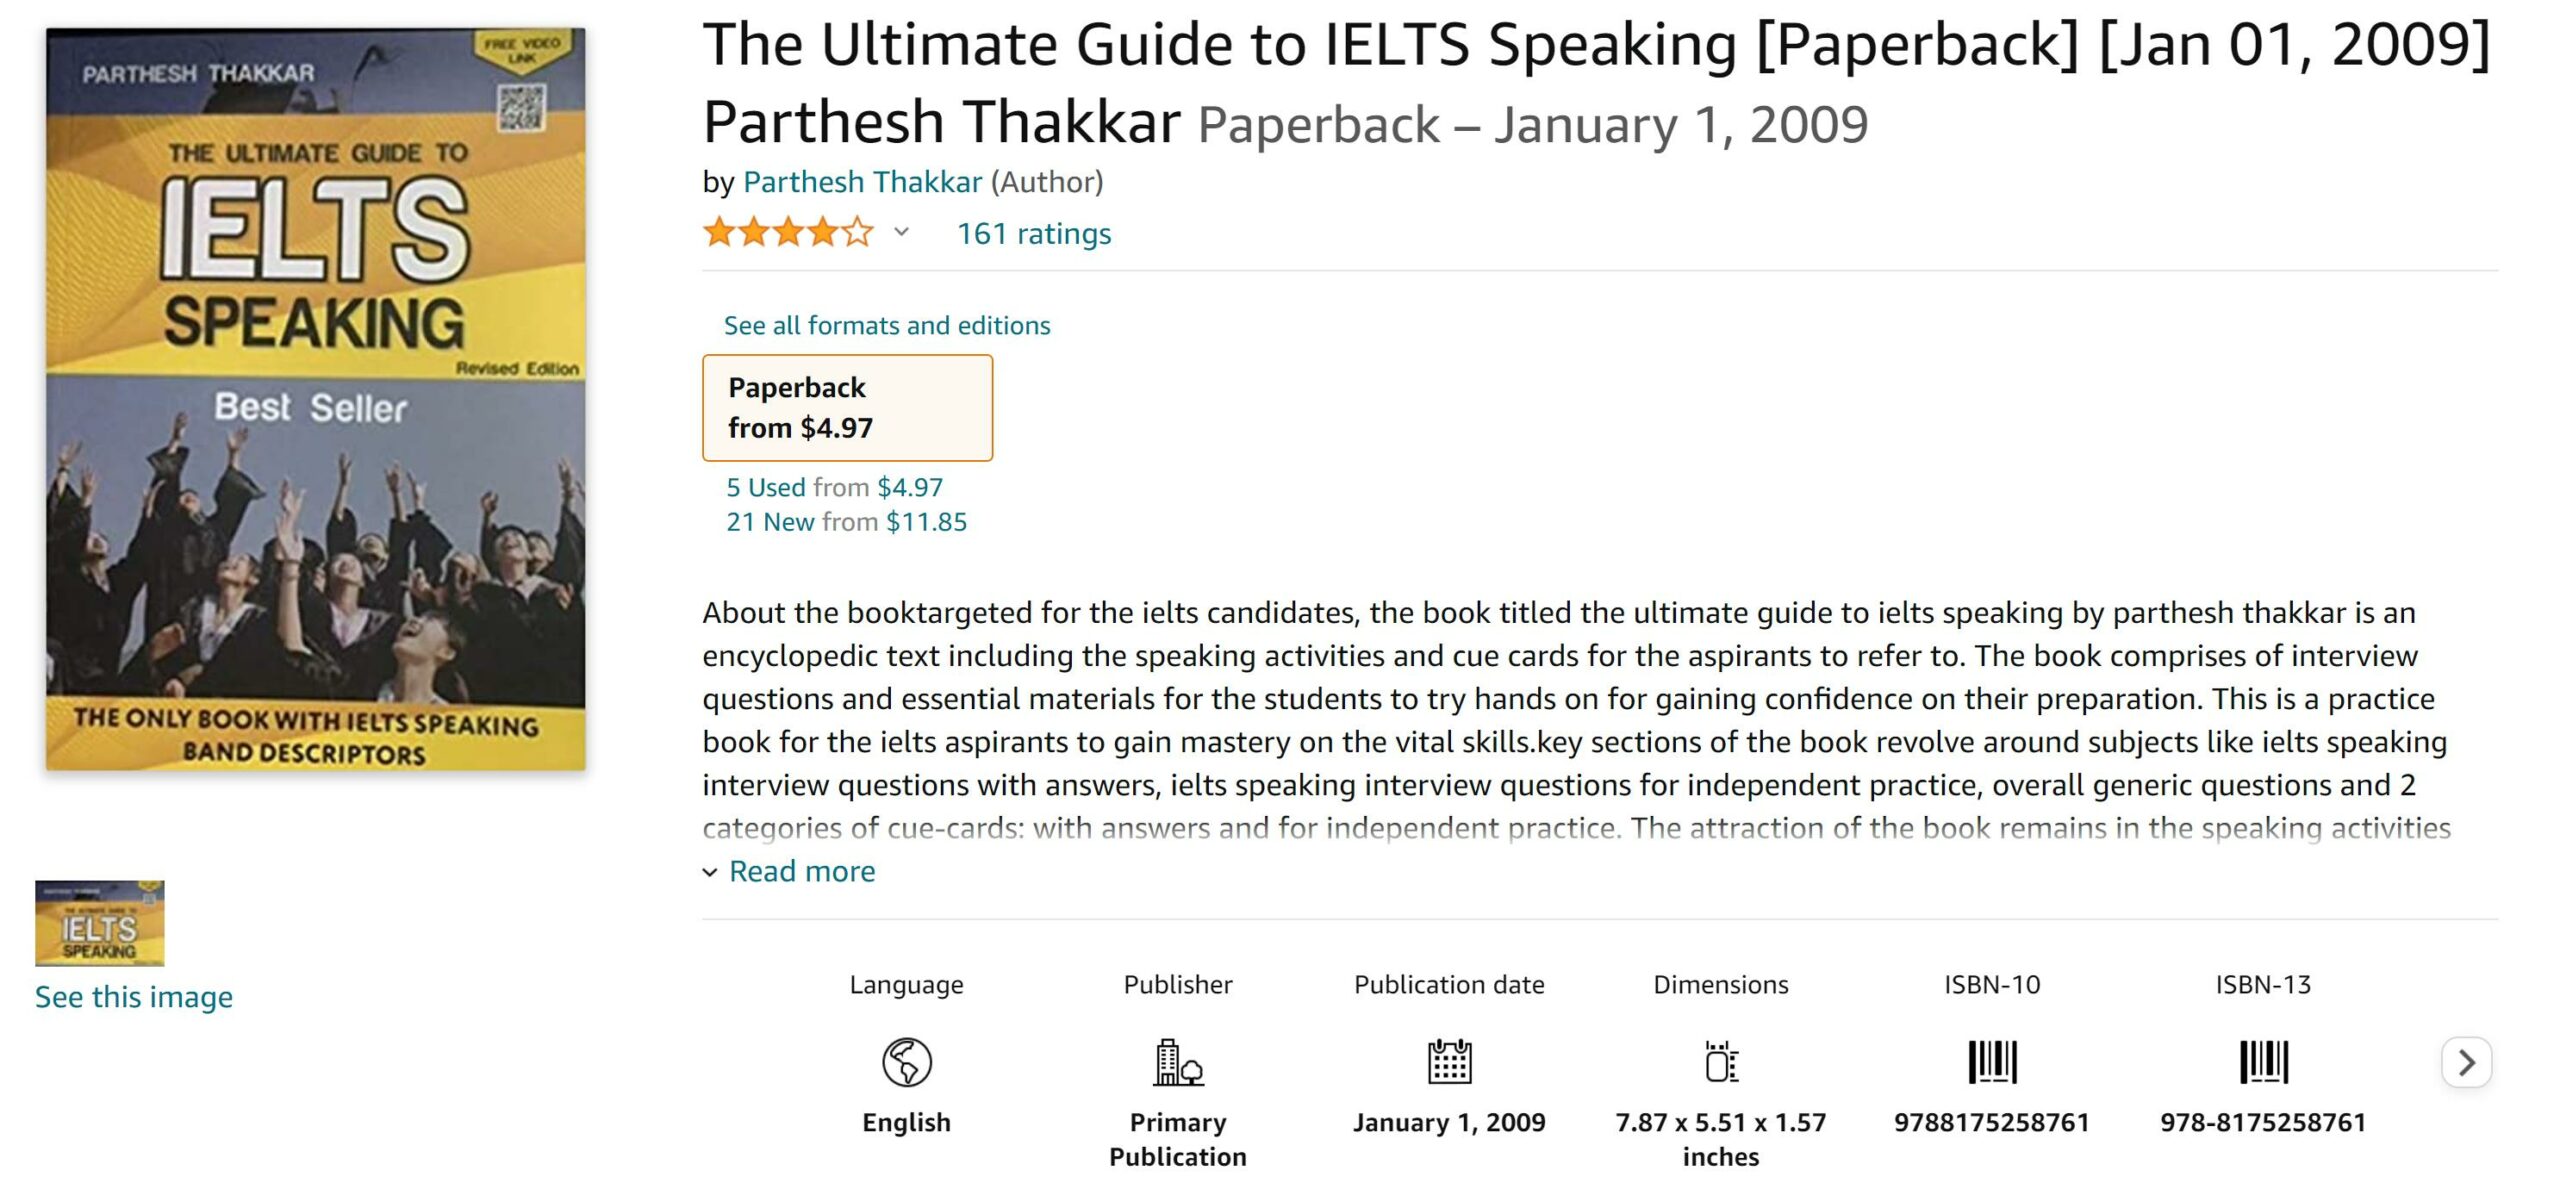 The Ultimate Guide to IELTS Speaking Guide Book